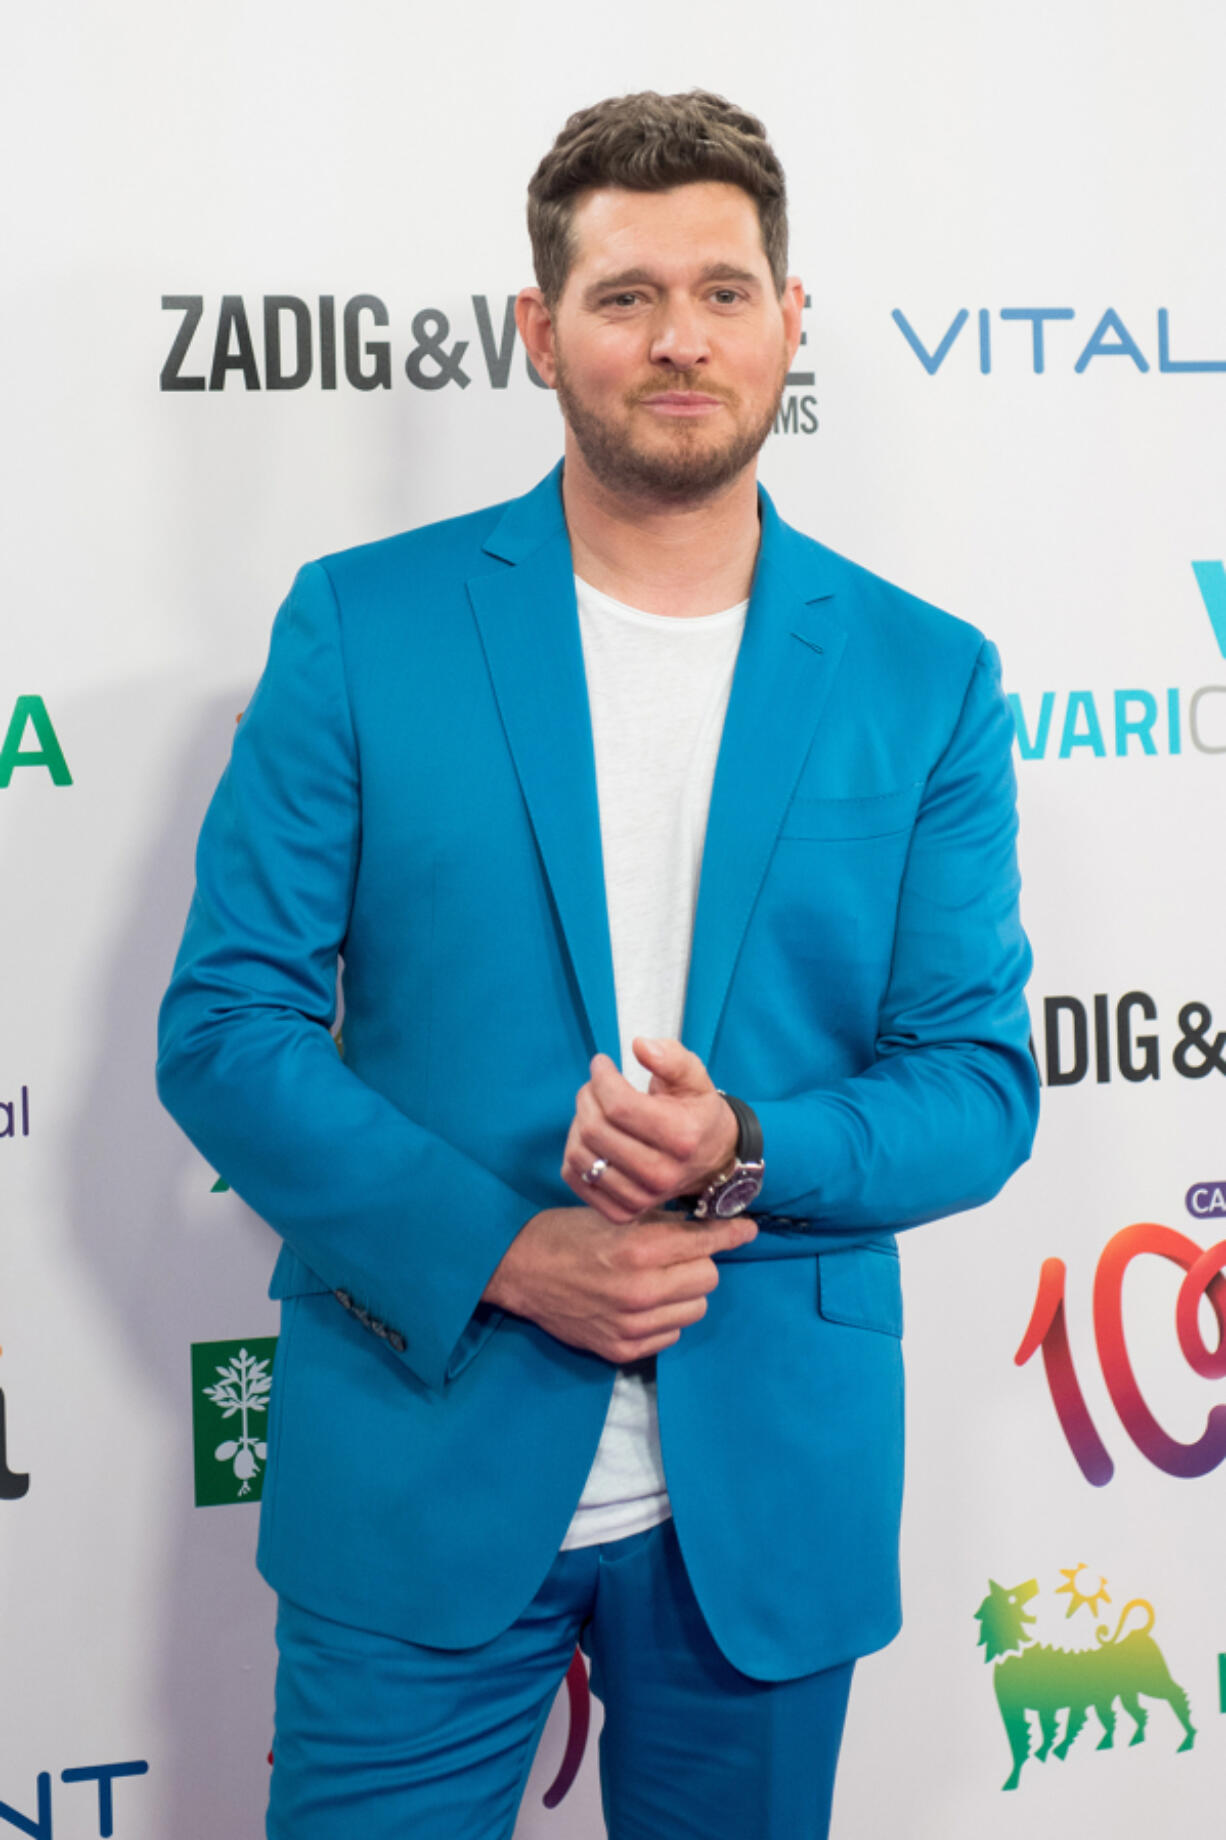 Michael Buble attends the 30th anniversary of Cadena 100 concerts at the Wanda Metropolitano Stadium on June 25, 2022, in Madrid, Spain.